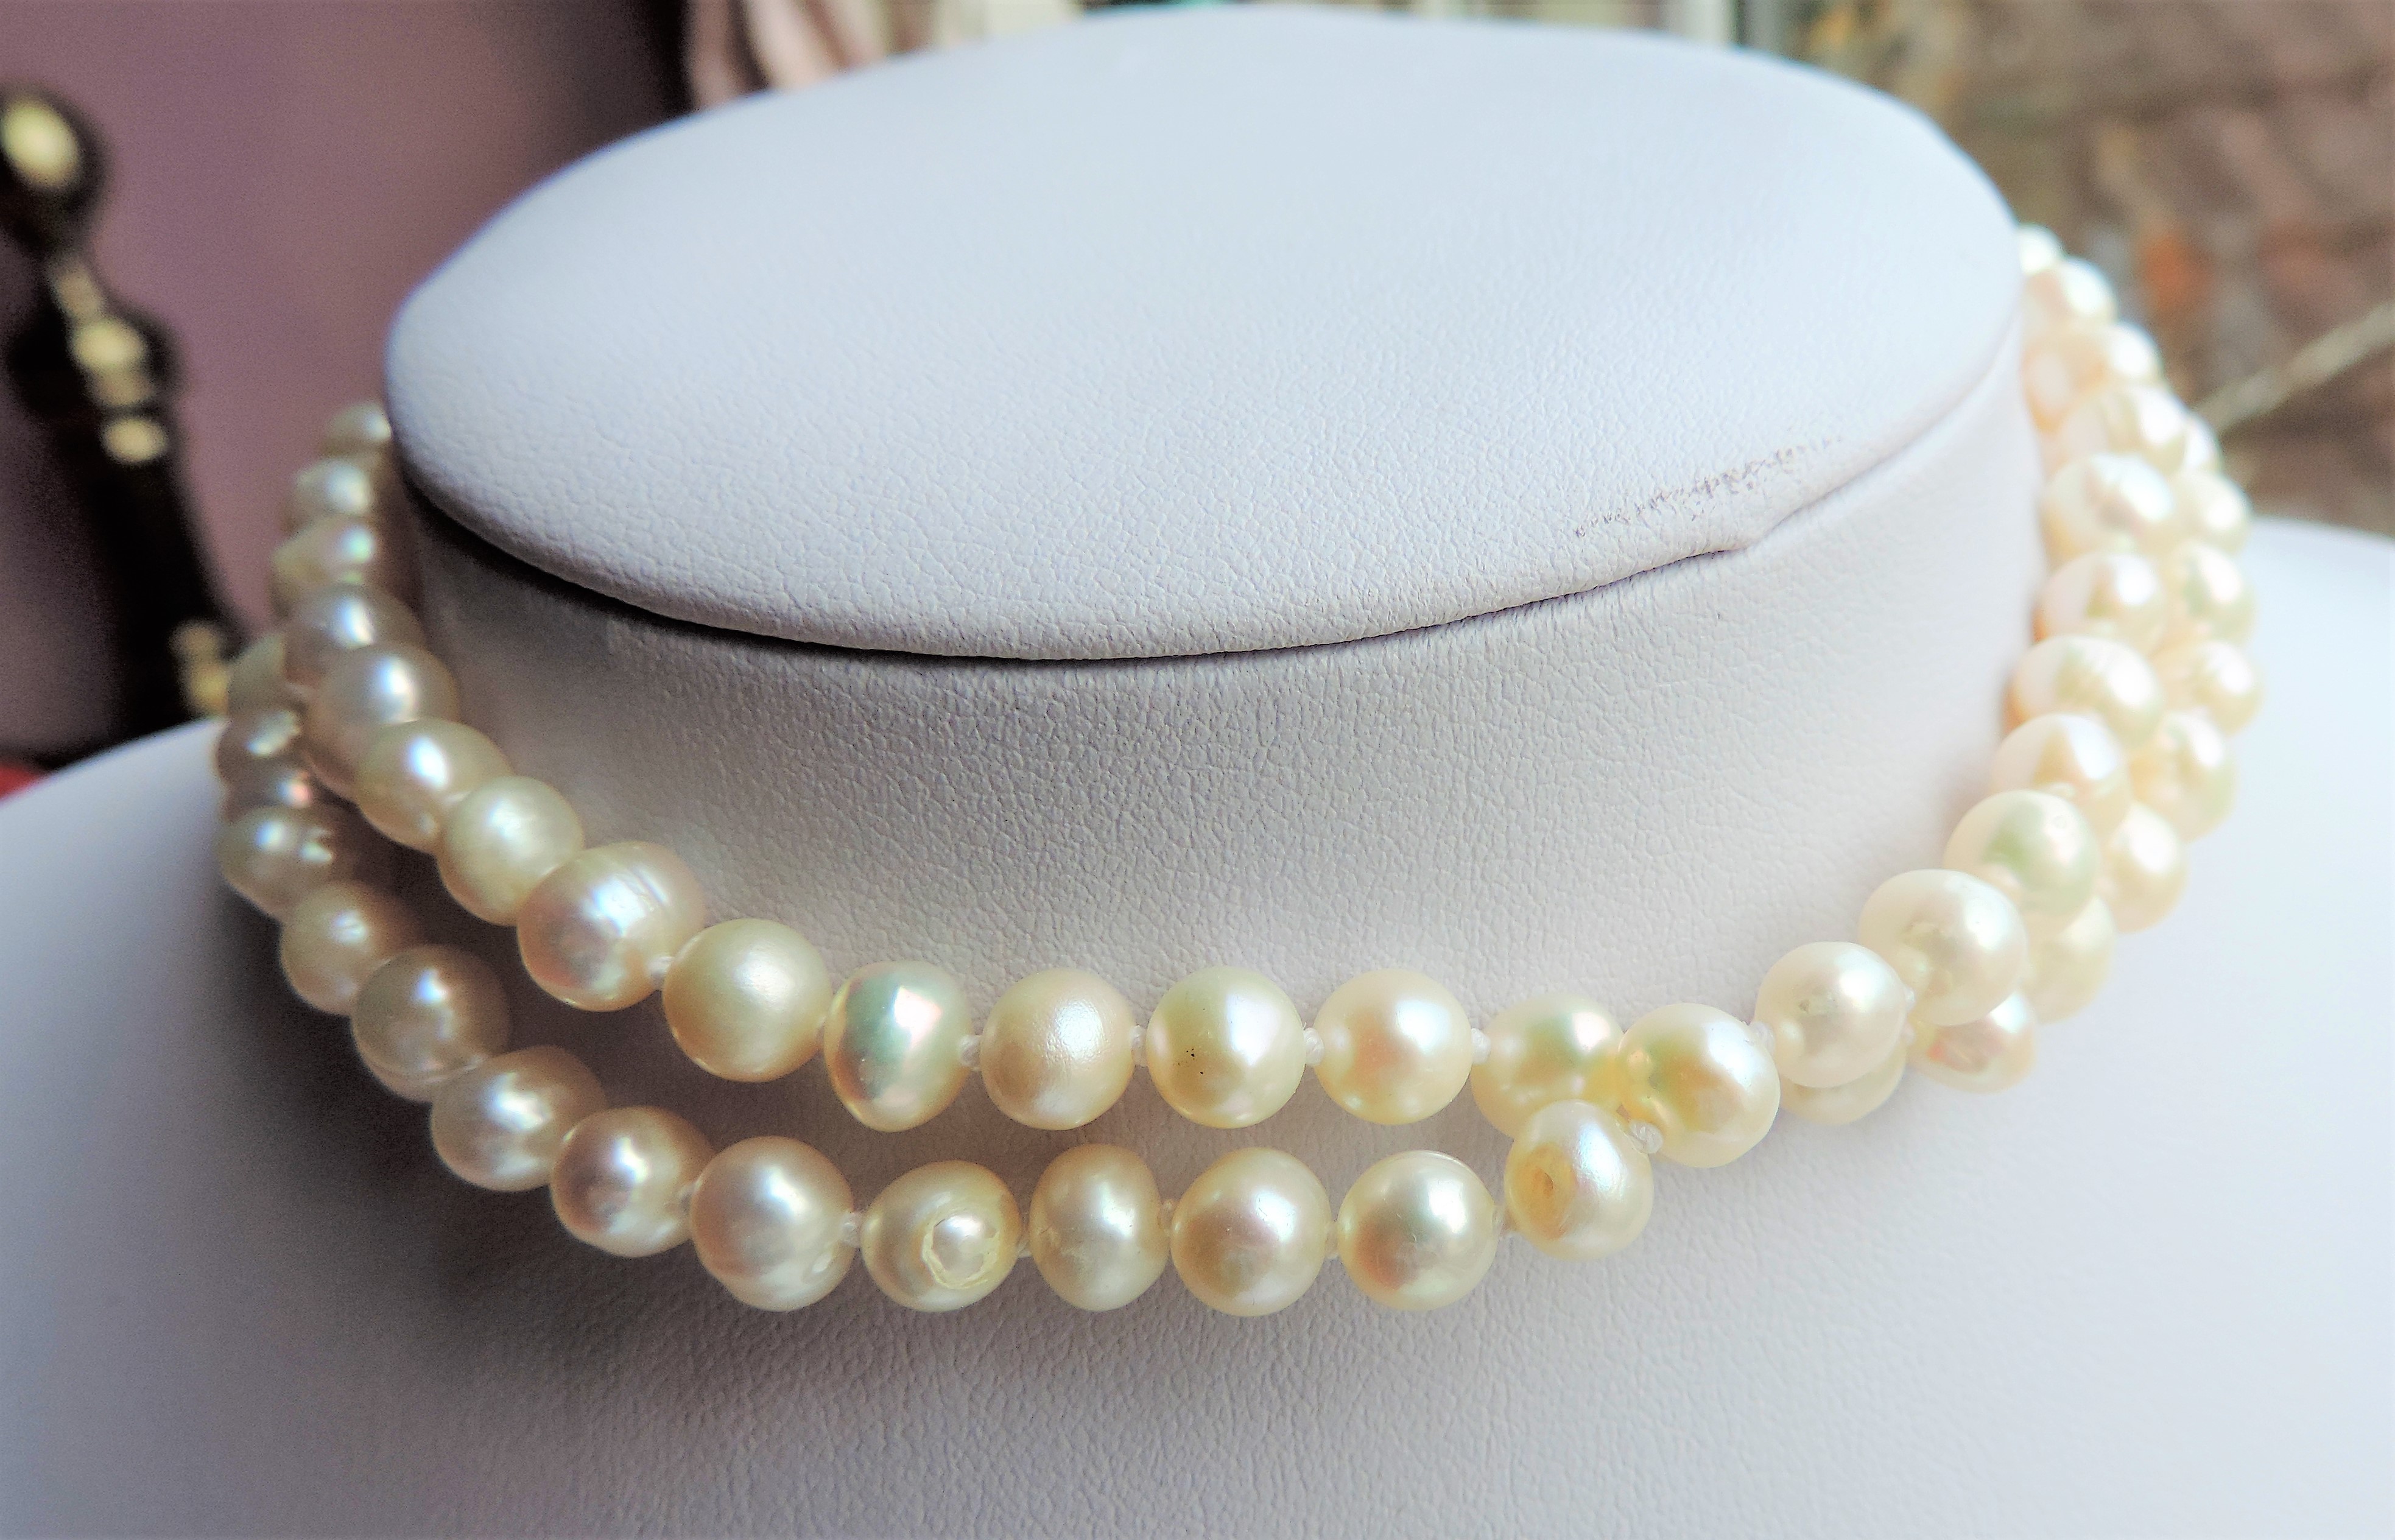 Cultured Pearl Necklace 23 inches long 90 x 6mm Pearls - Image 2 of 4